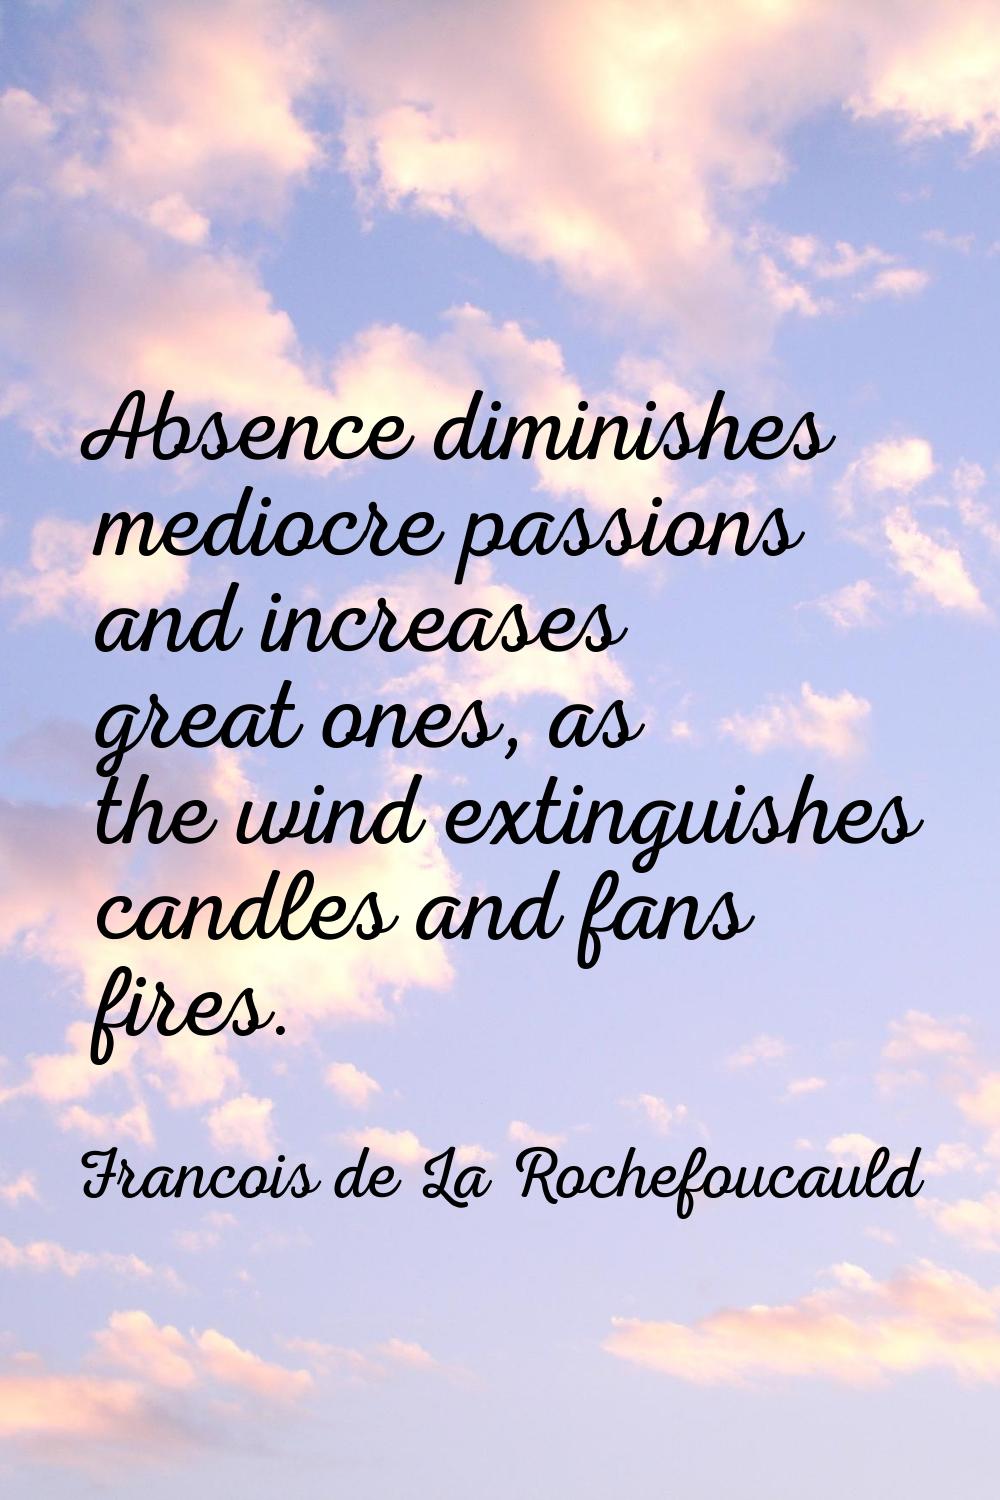 Absence diminishes mediocre passions and increases great ones, as the wind extinguishes candles and